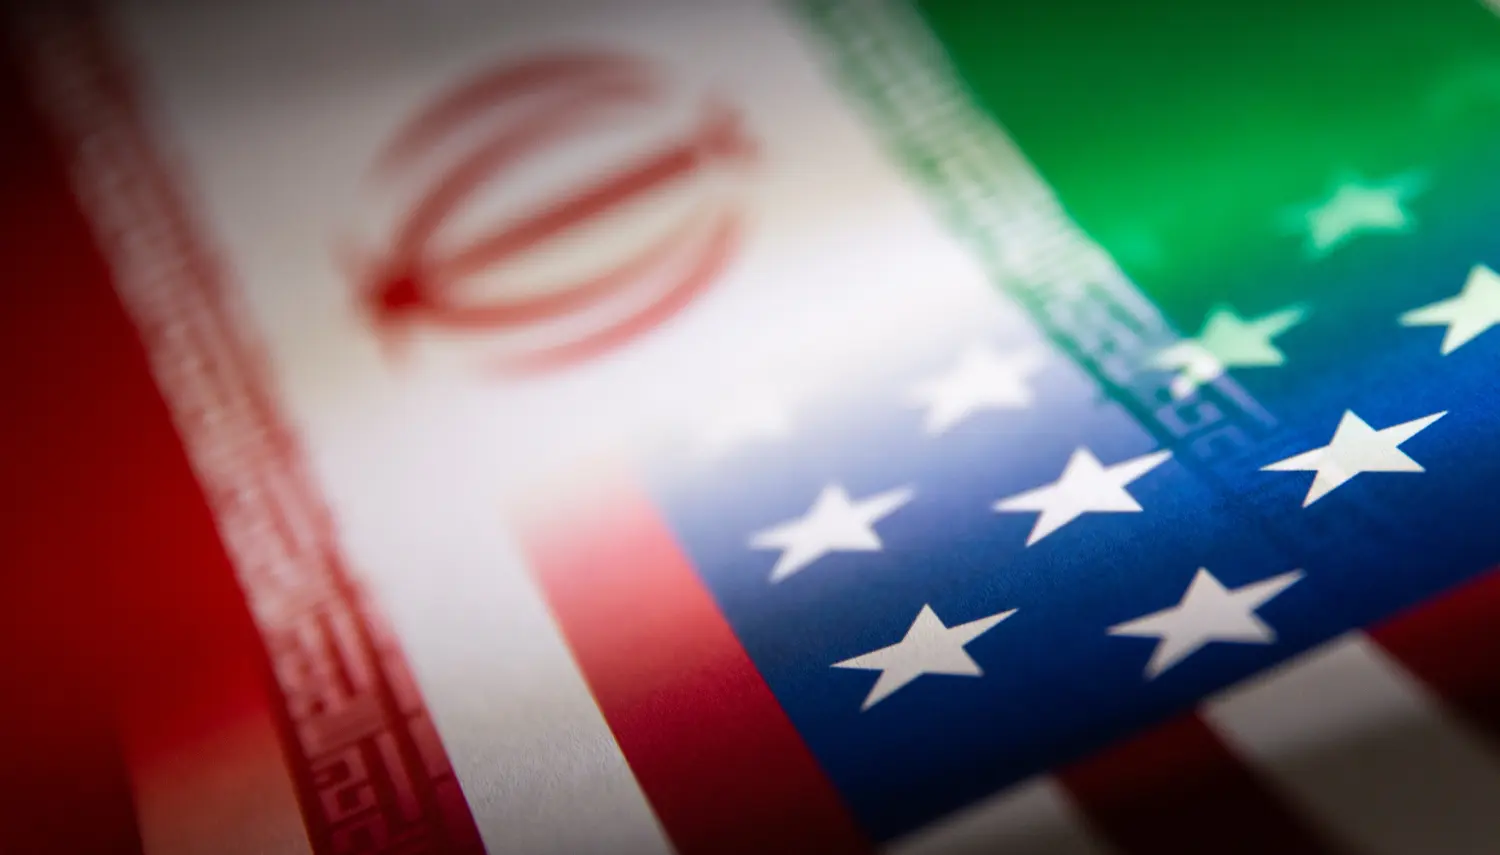 Iran's and U.S.' flags are seen printed on paper in this illustration taken January 27, 2022. REUTERS/Dado Ruvic/Illustration